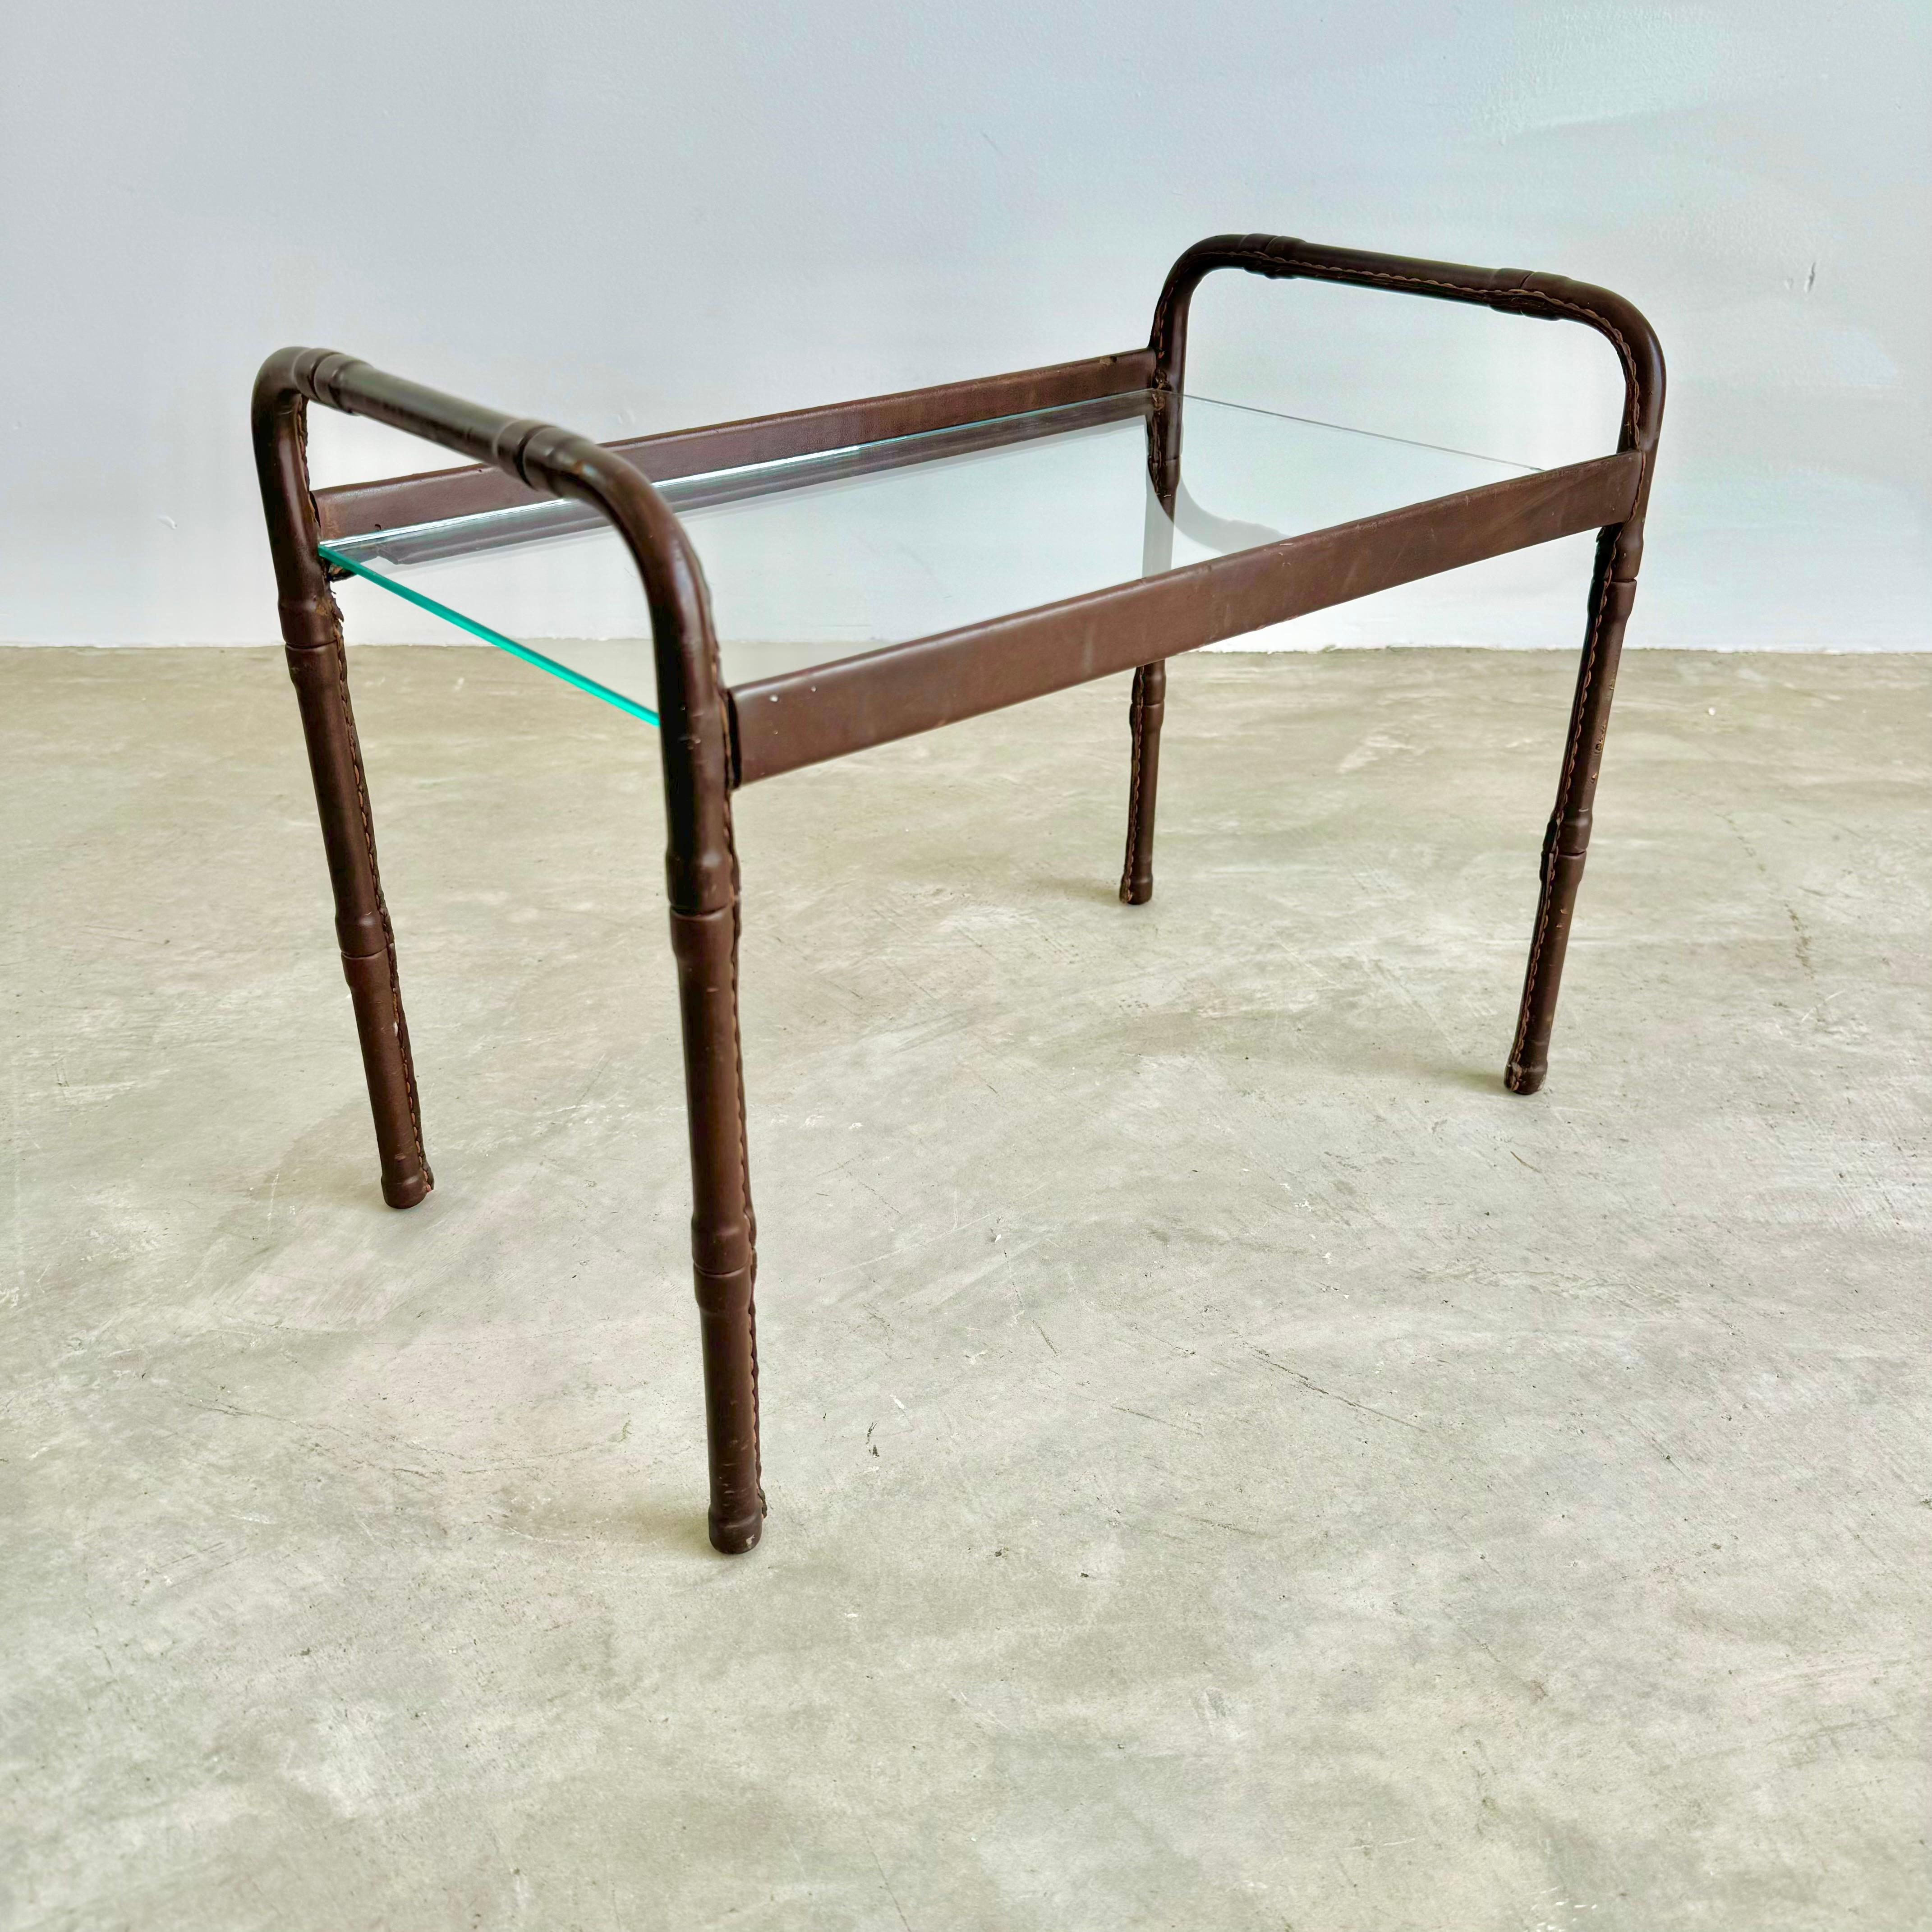 French Jacques Adnet Leather and Glass Side Table, 1950s France For Sale